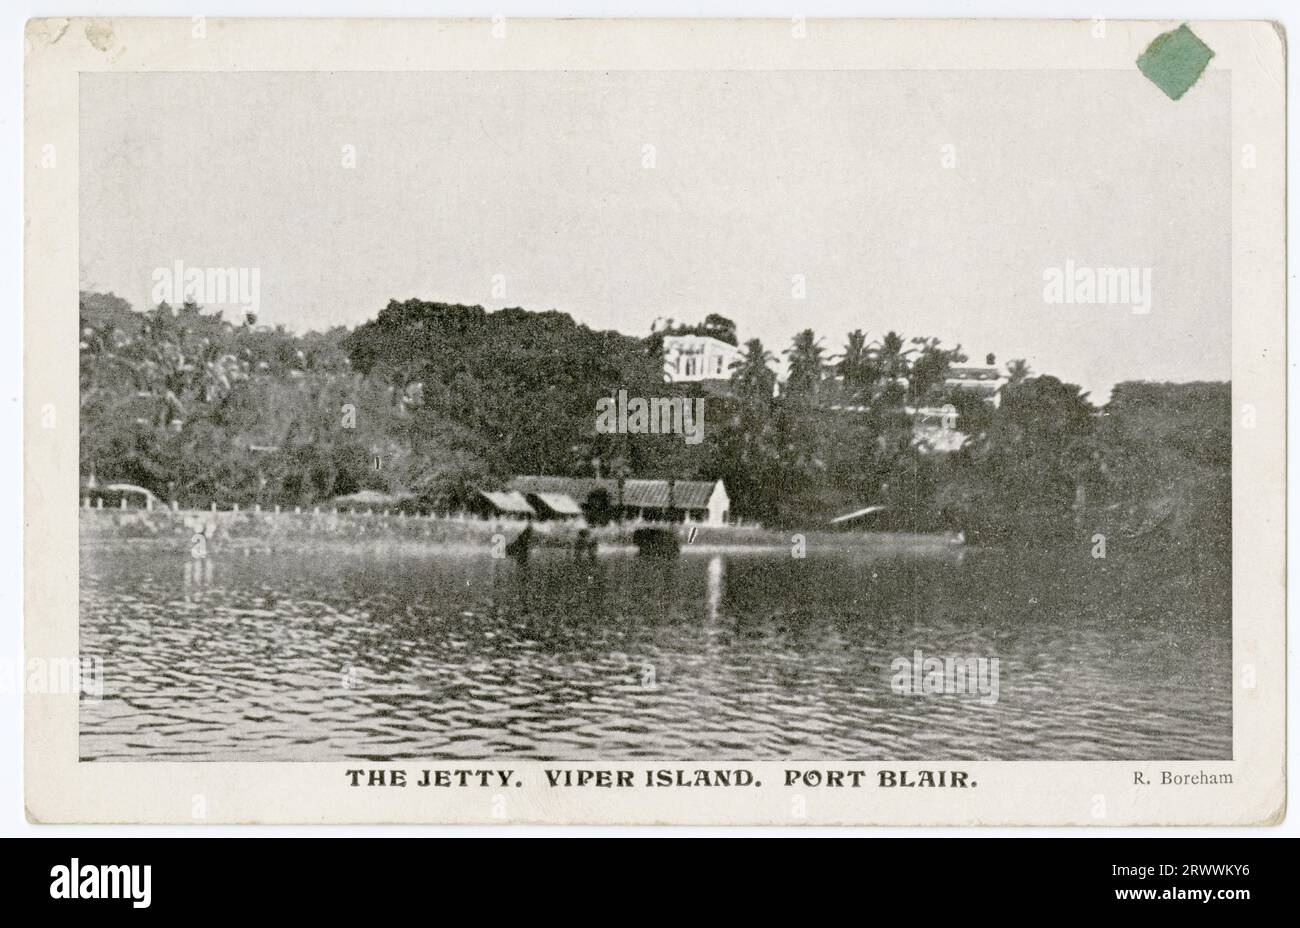 Postcard showing a small group of sheds on a waterfront below a tree-clad hill, on which is sited a substantial building, partly hidden among the trees. A printed caption reads The Jetty, Viper Island, Port Blair. Copyright: R Boreham. Stock Photo